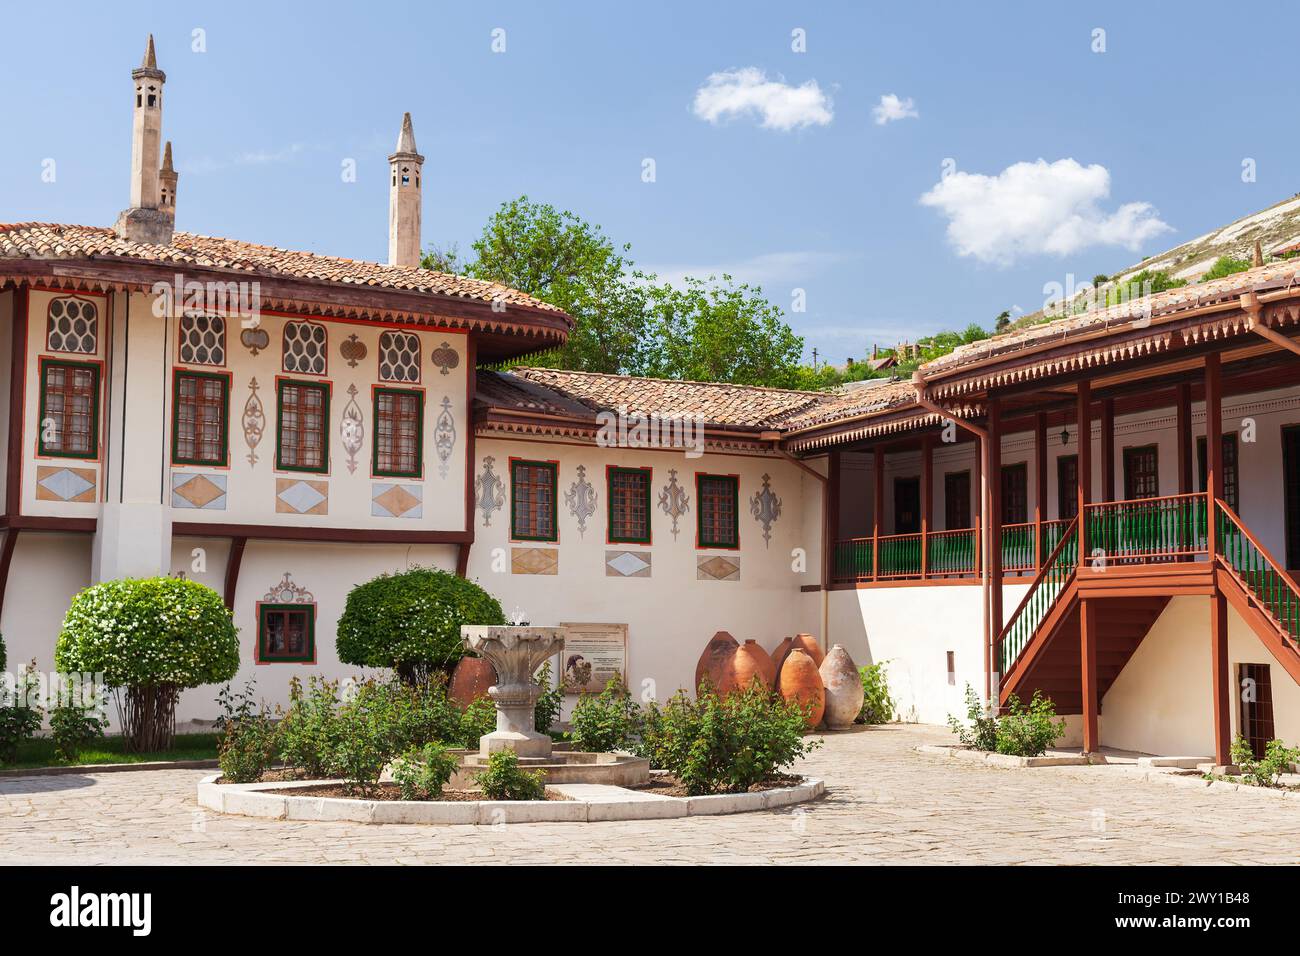 Bakhchysarai, Crimea - May 6, 2018: The Khans Palace or Hansaray is located in the town of Bakhchysarai, known also as Bakhchysarai Palace Stock Photo